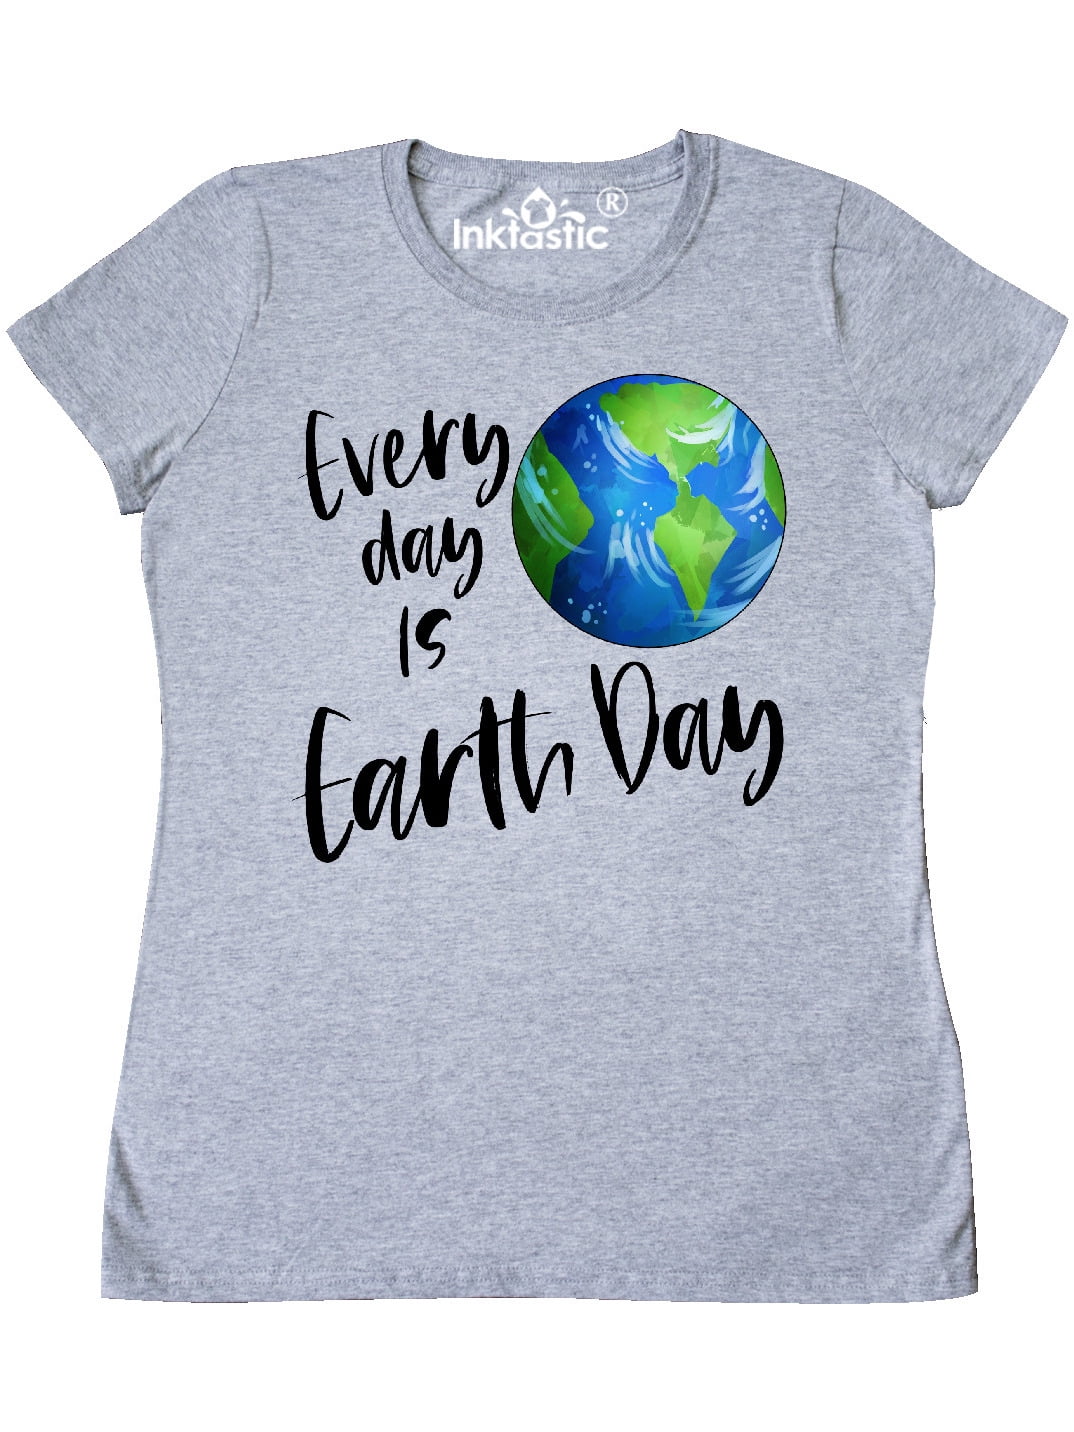 INKtastic - Every Day is Earth Day Women's T-Shirt - Walmart.com ...